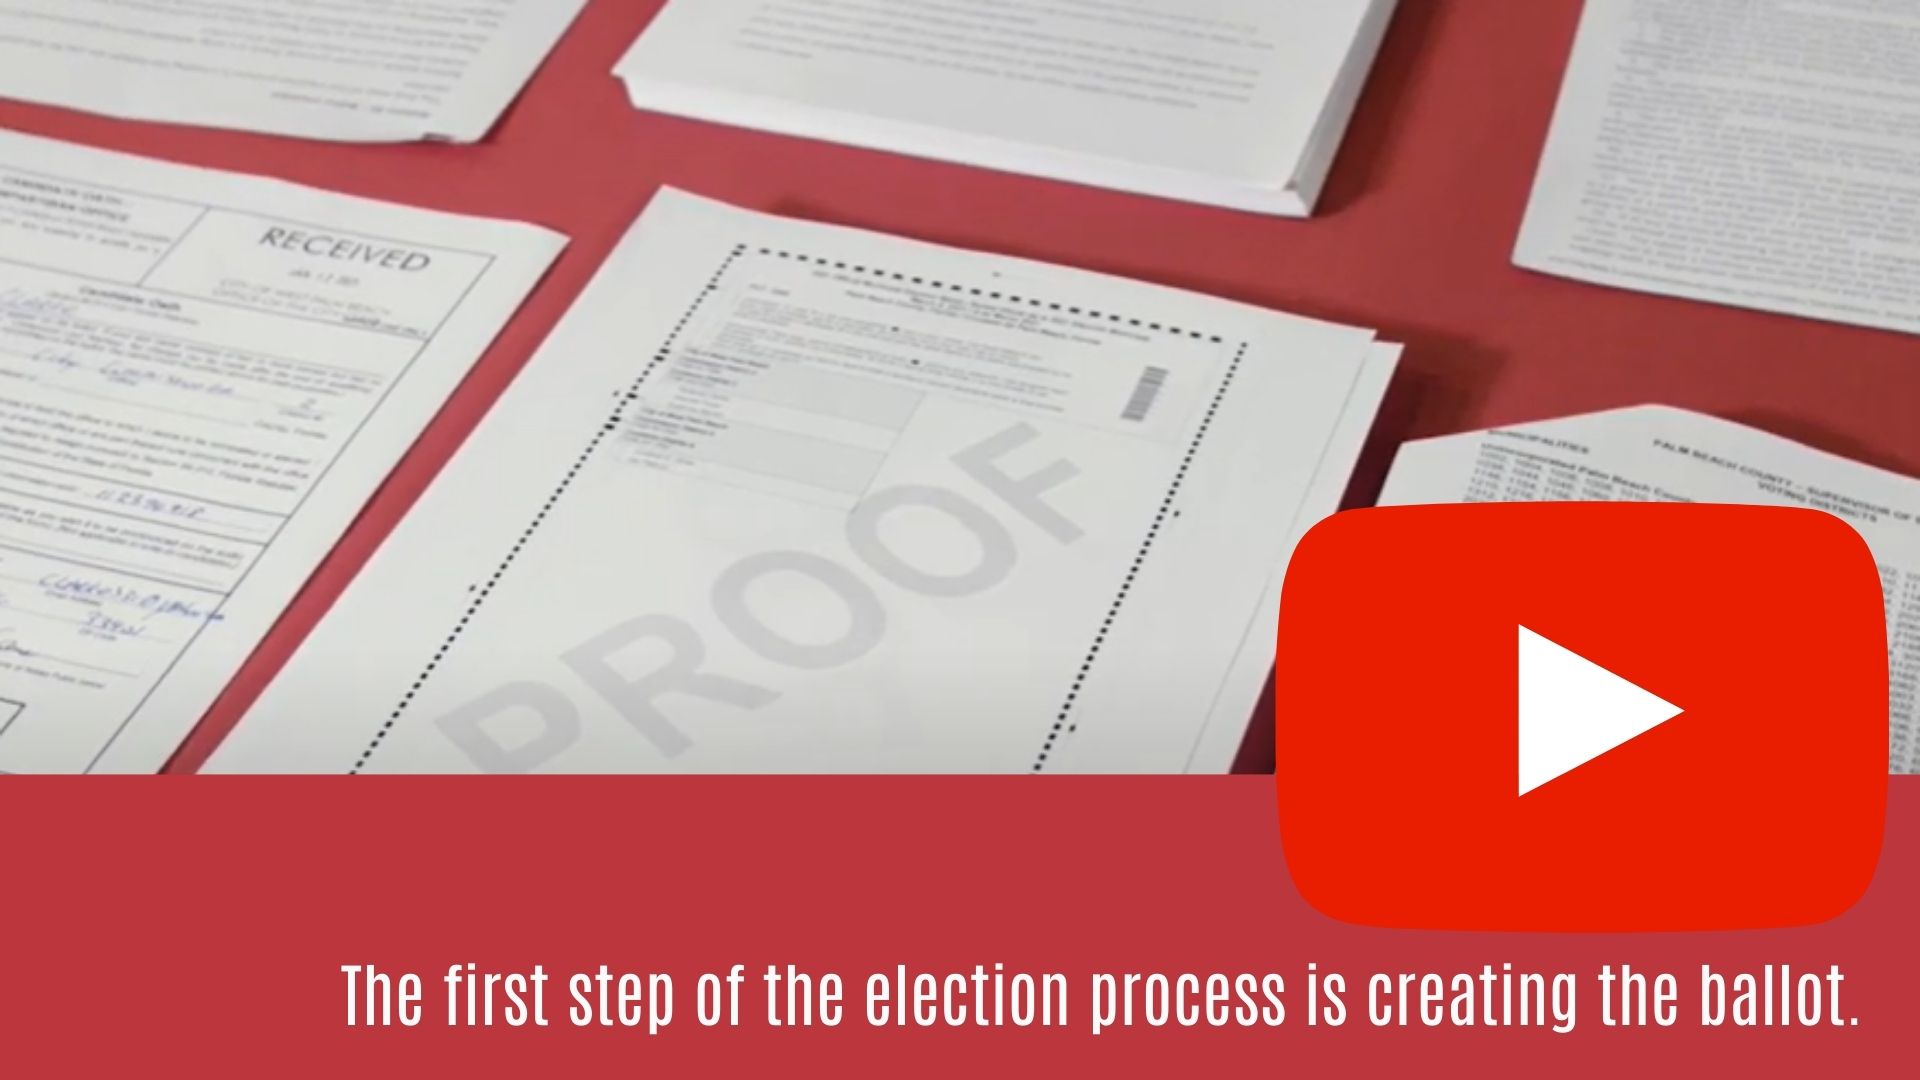 The first step of the election process is creating the ballot. (2)